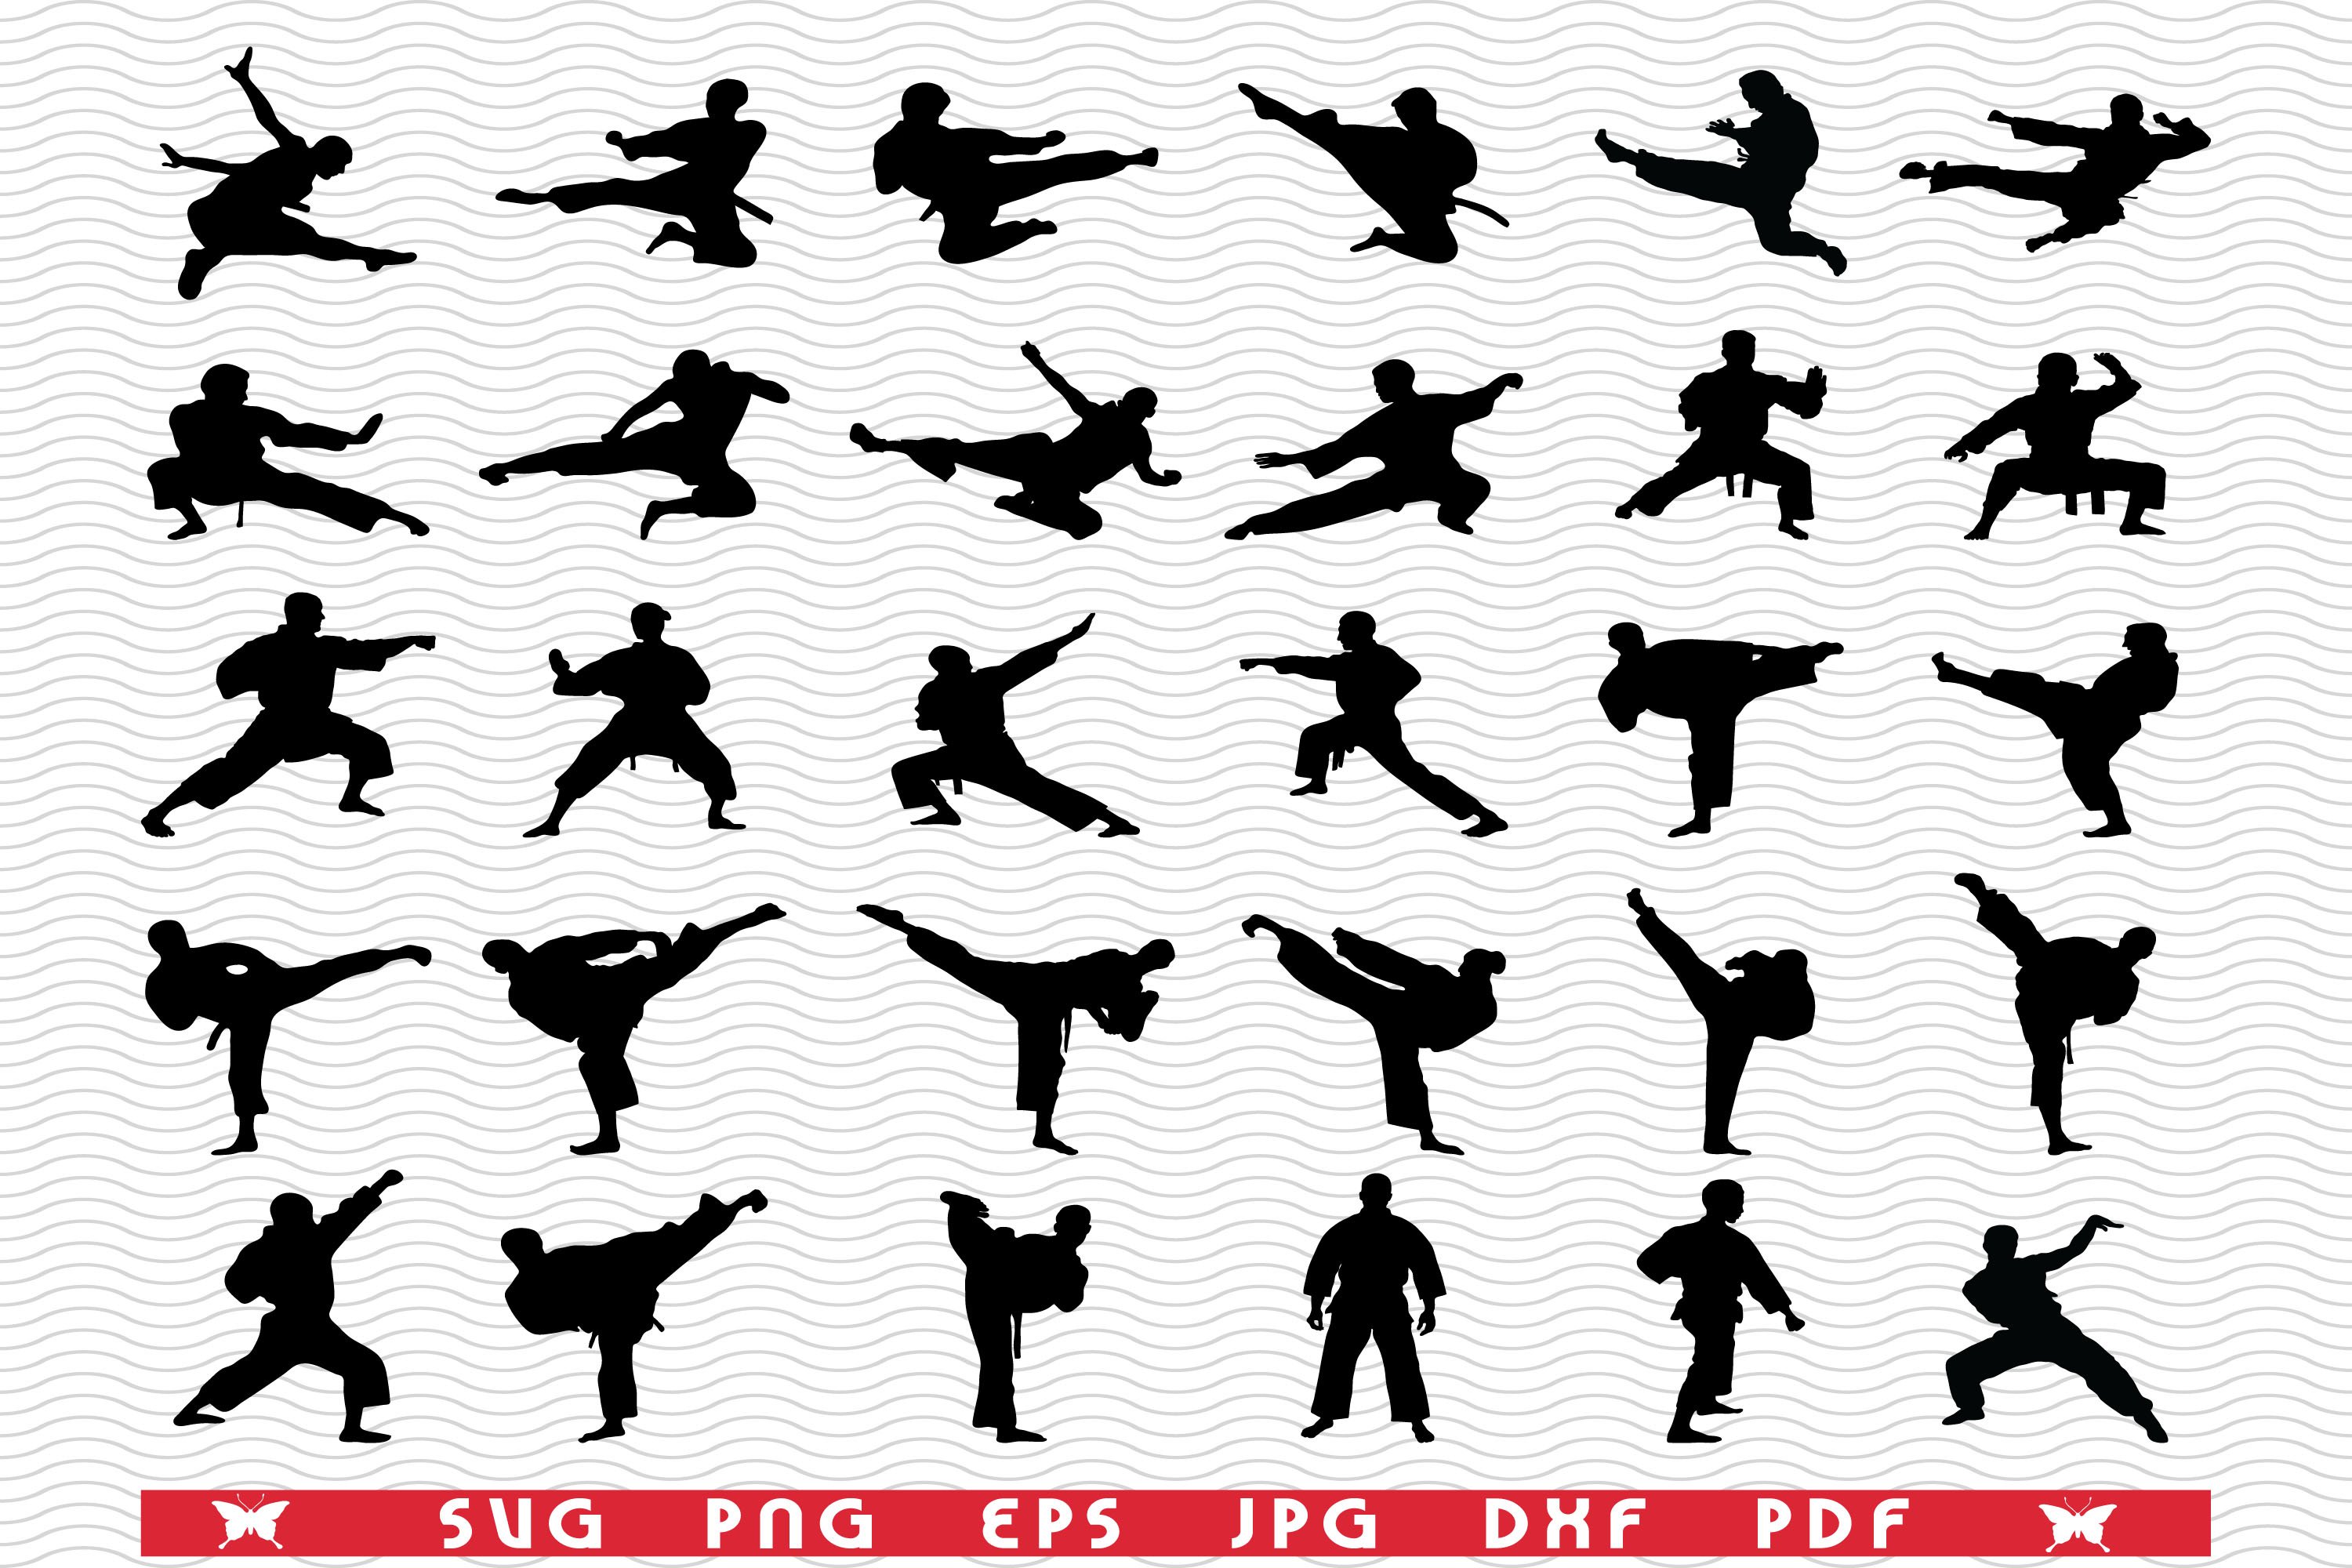 SVG Karate Fighters, Silhouettes cover image.